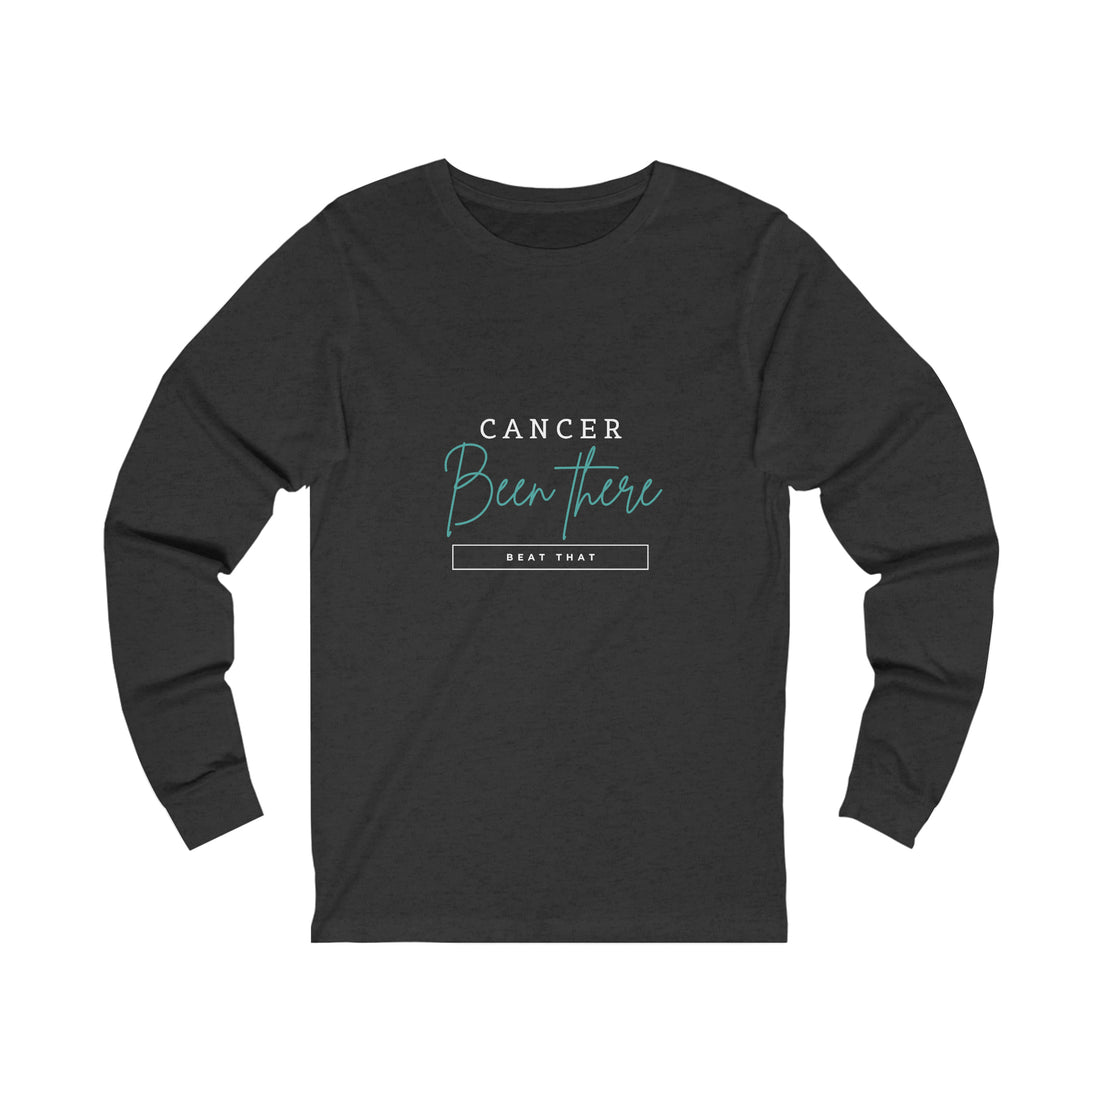 Cancer Been There Beat That - Unisex Jersey Long Sleeve Tee